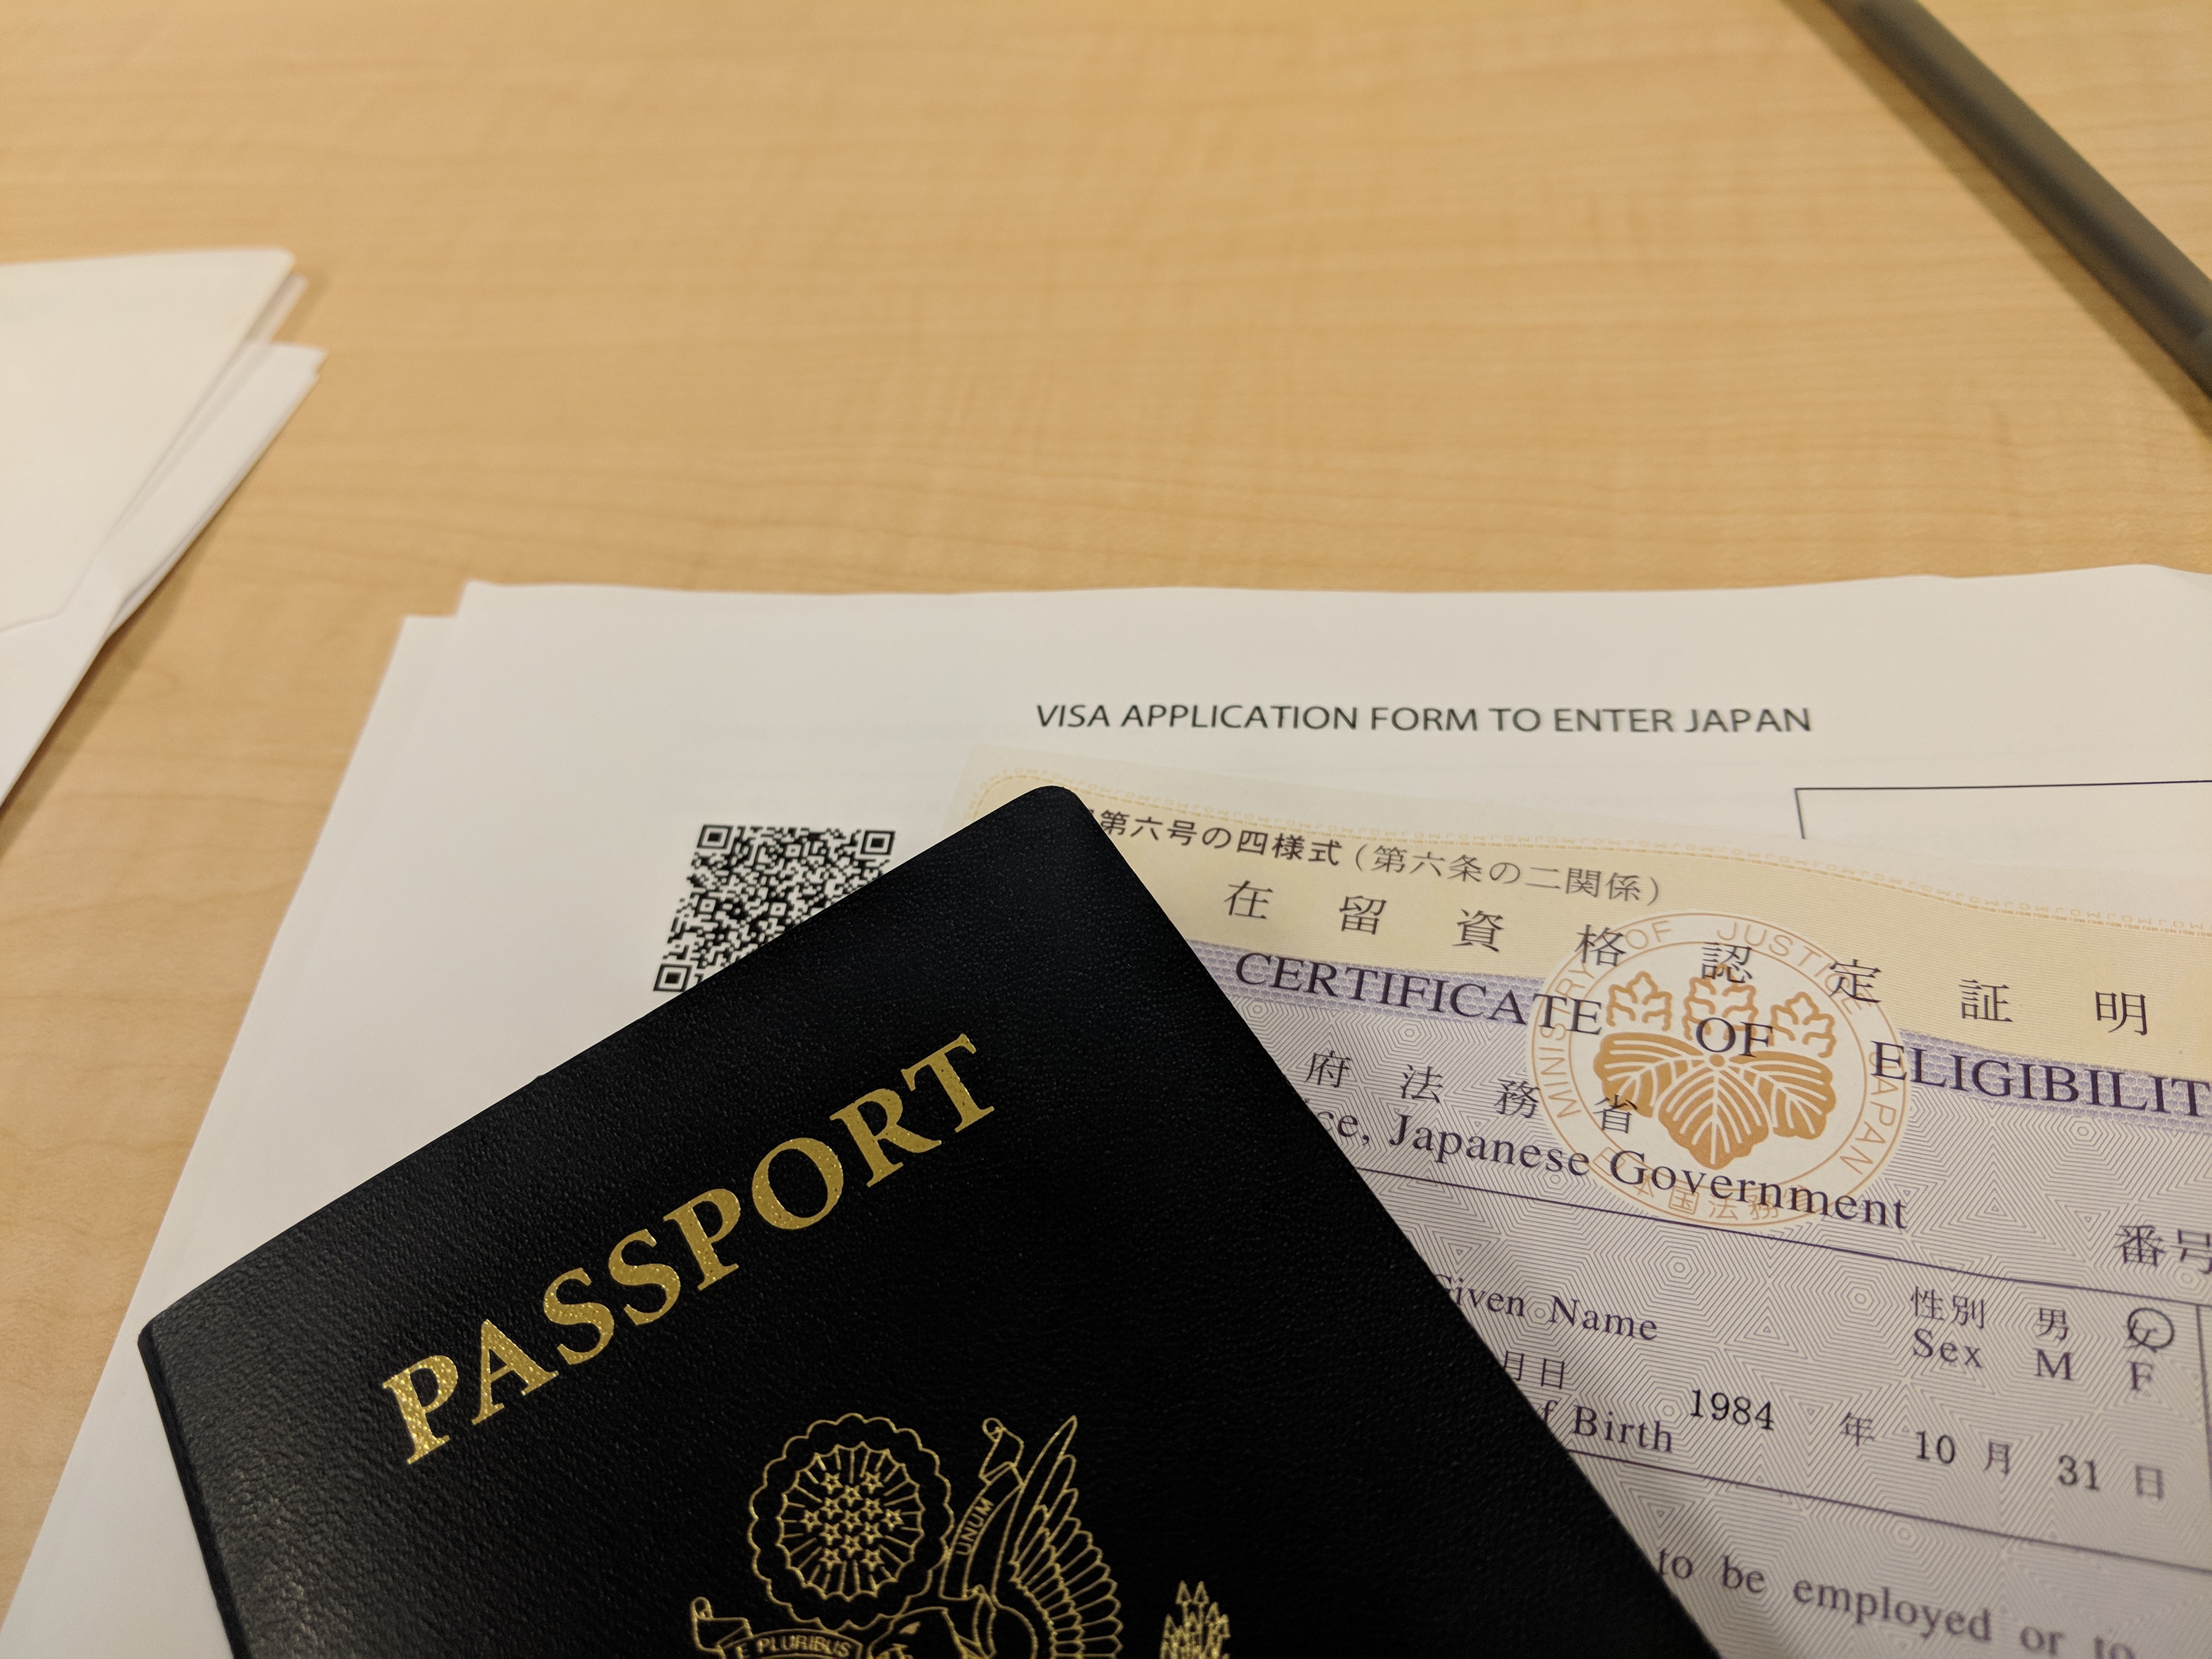 Getting our Long-Term Resident Visa (Ancestry Visa) for Japan - The Documents (Part 3)